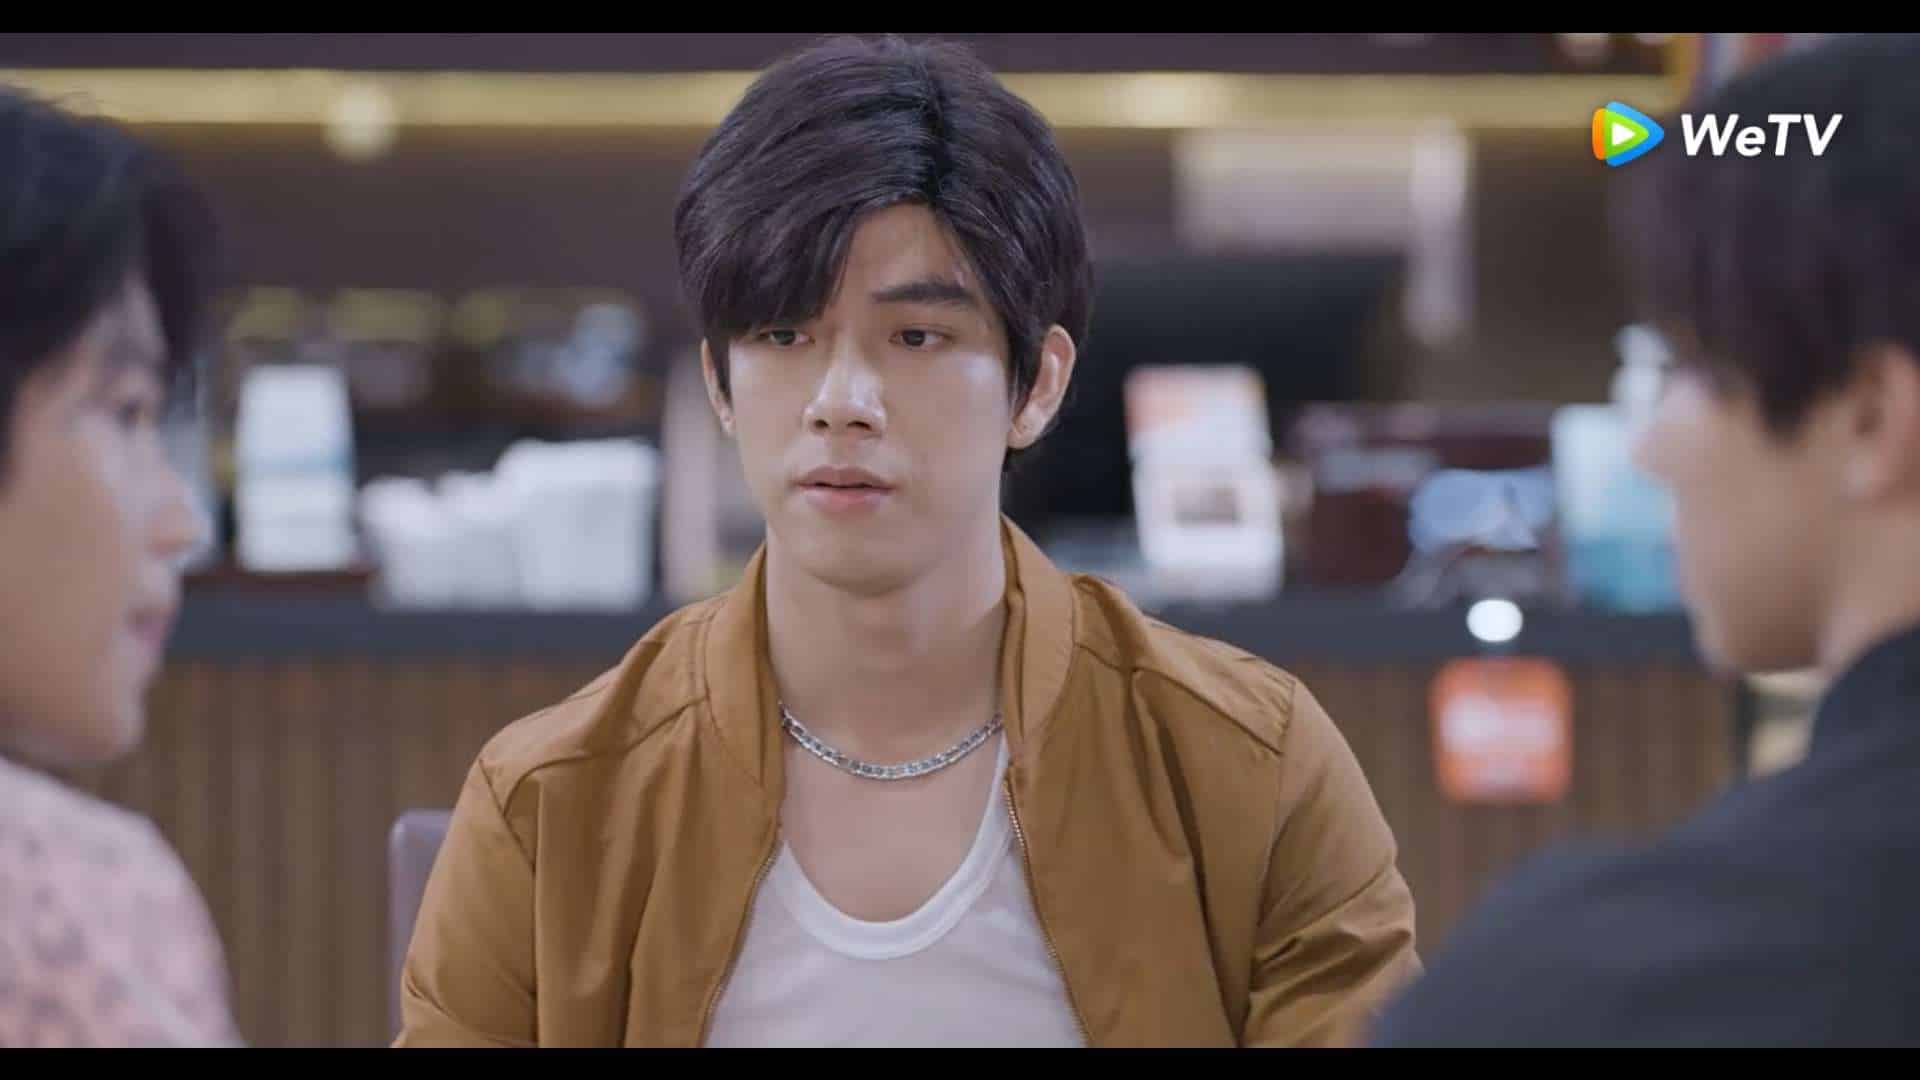 Love Syndrome III Episode 6 preview